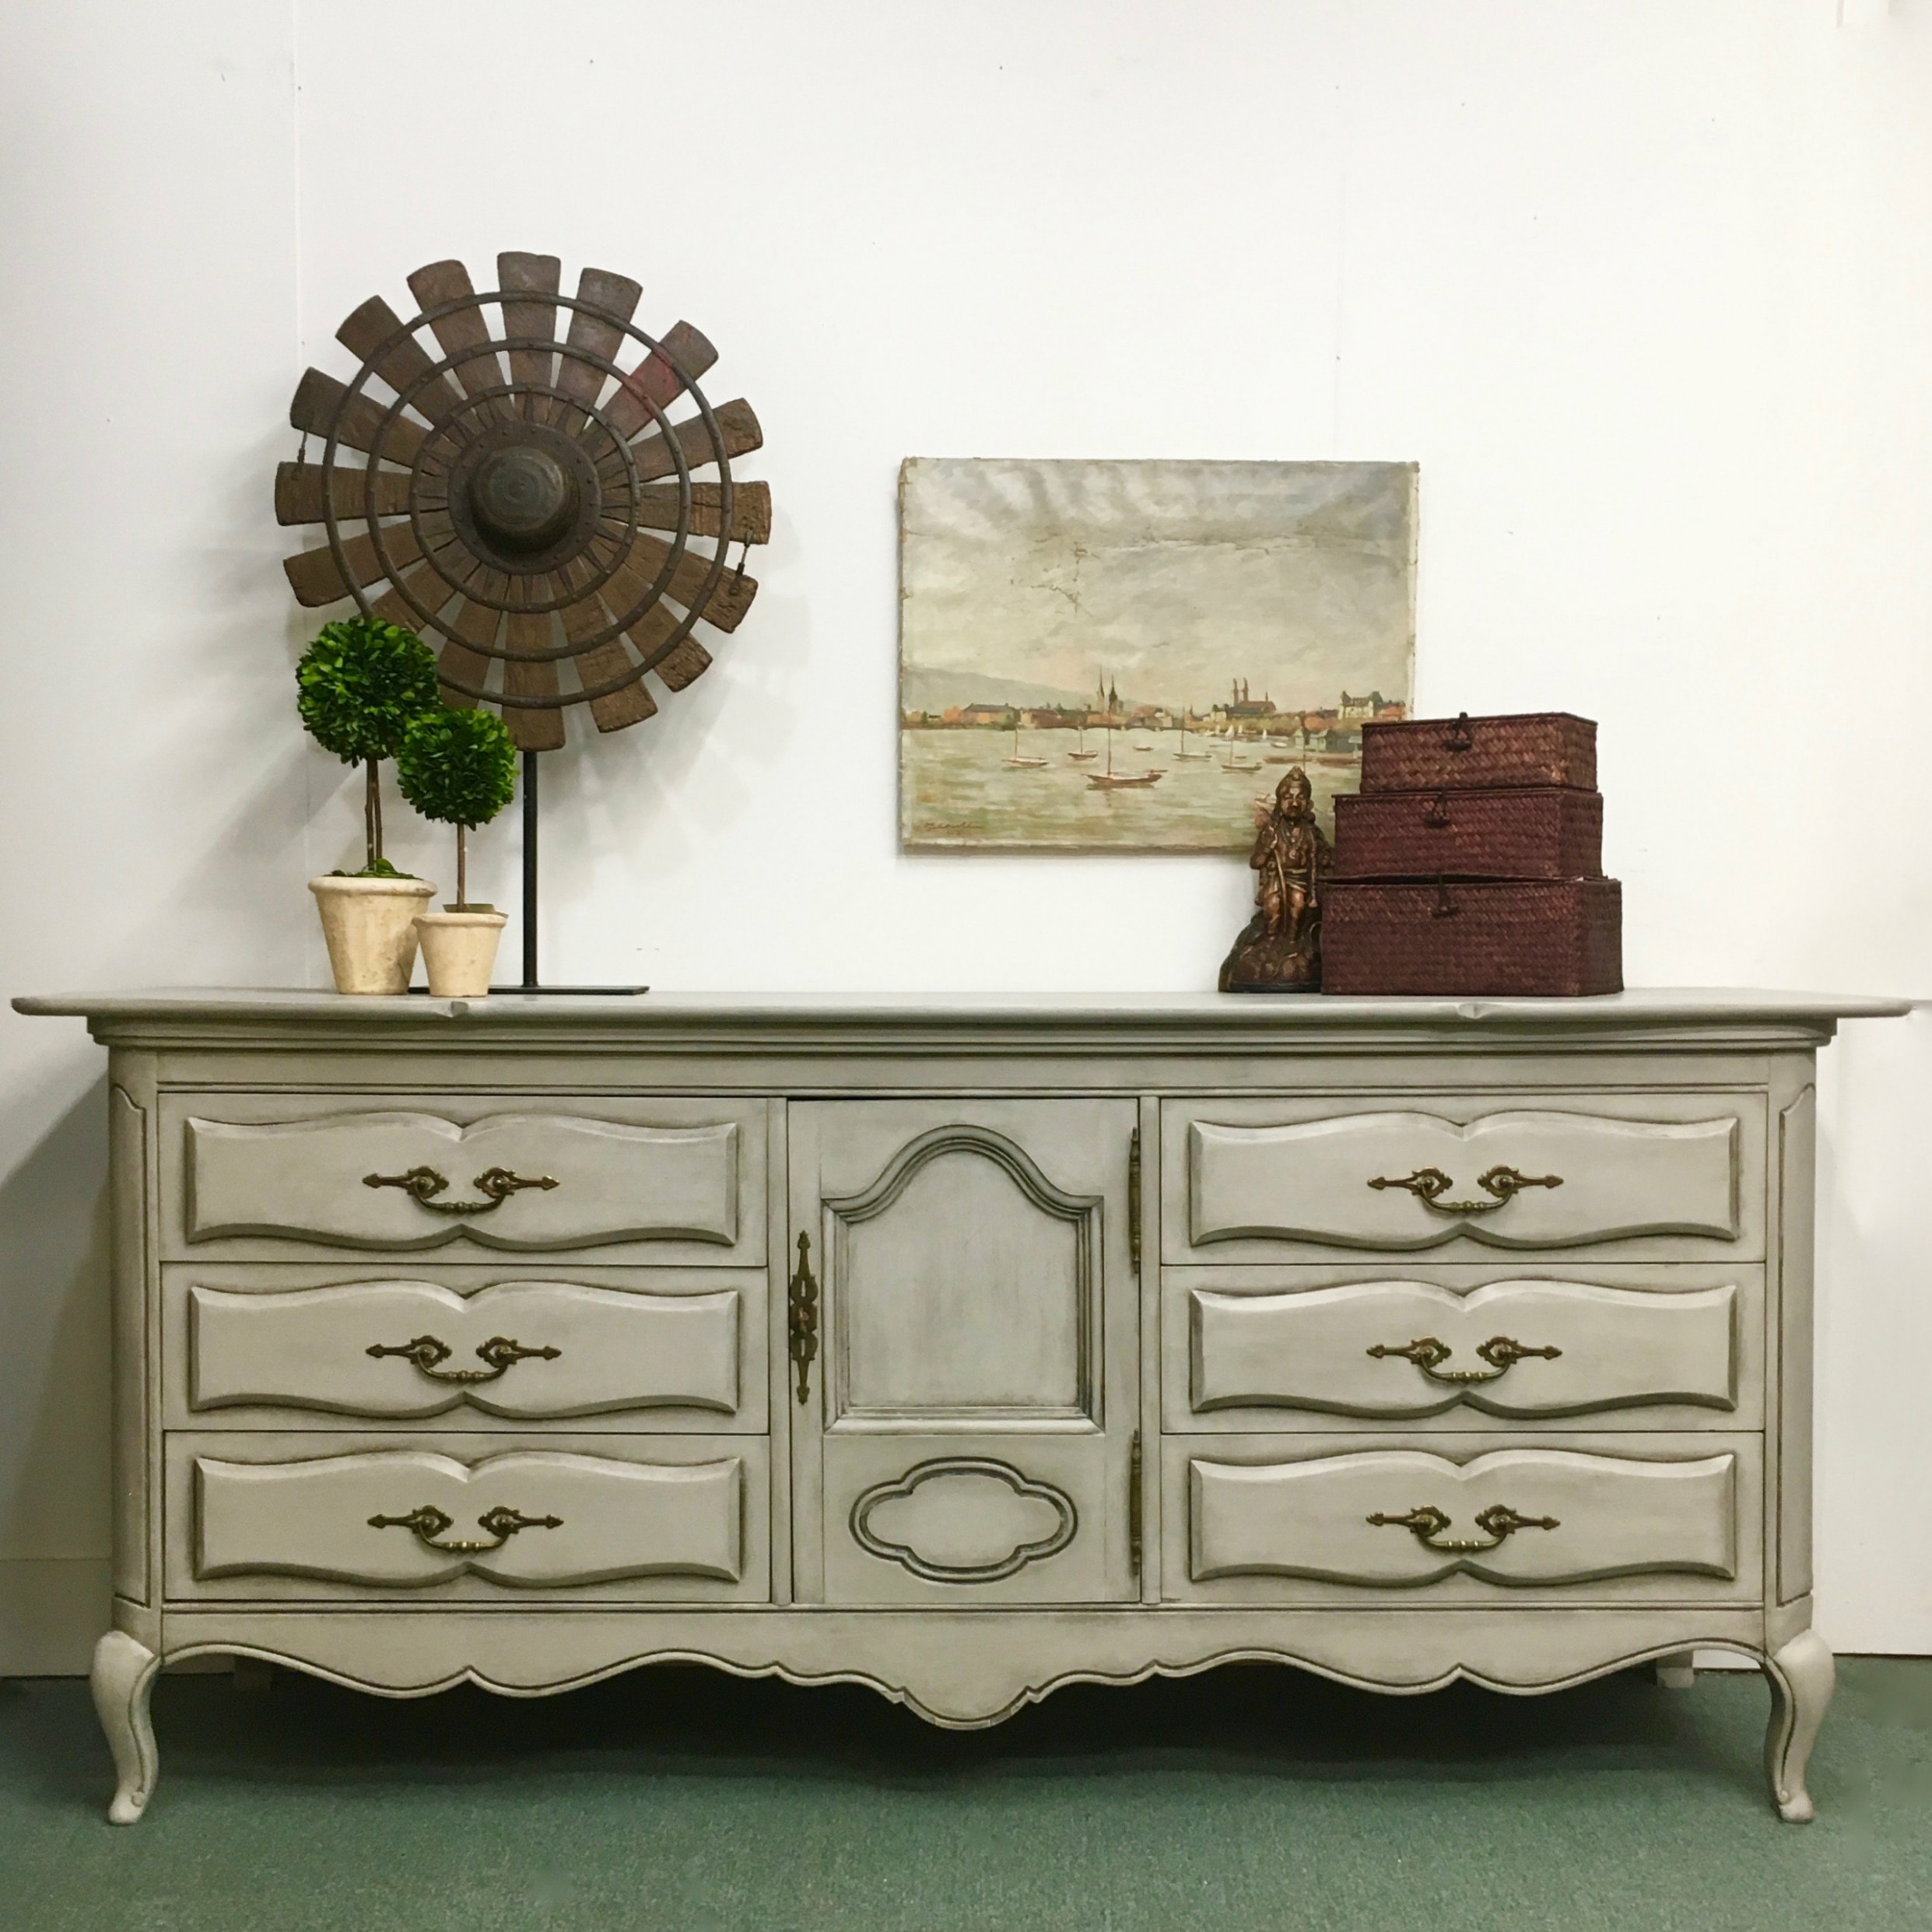 French Provincial Dresser In Paris Grey Chalk Paint® By Annie Sloan Annie Sloan Chalk Paint Paris Grey Where To Buy